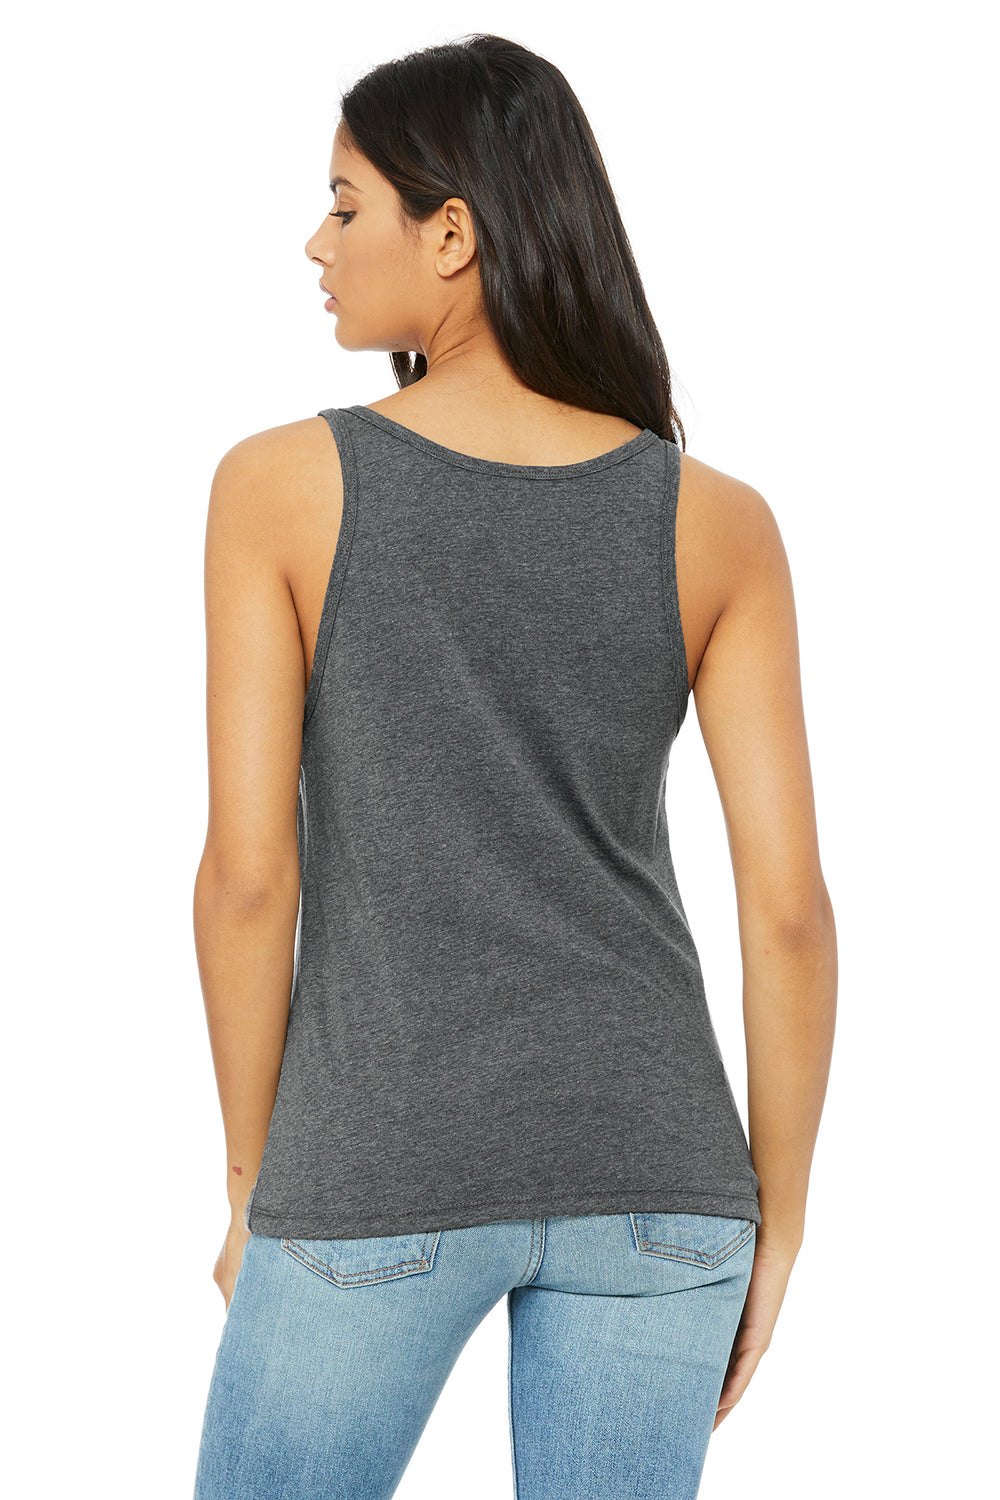 Bella + Canvas 6488 Womens Relaxed Jersey Tank Top Heather Deep Grey Model Back